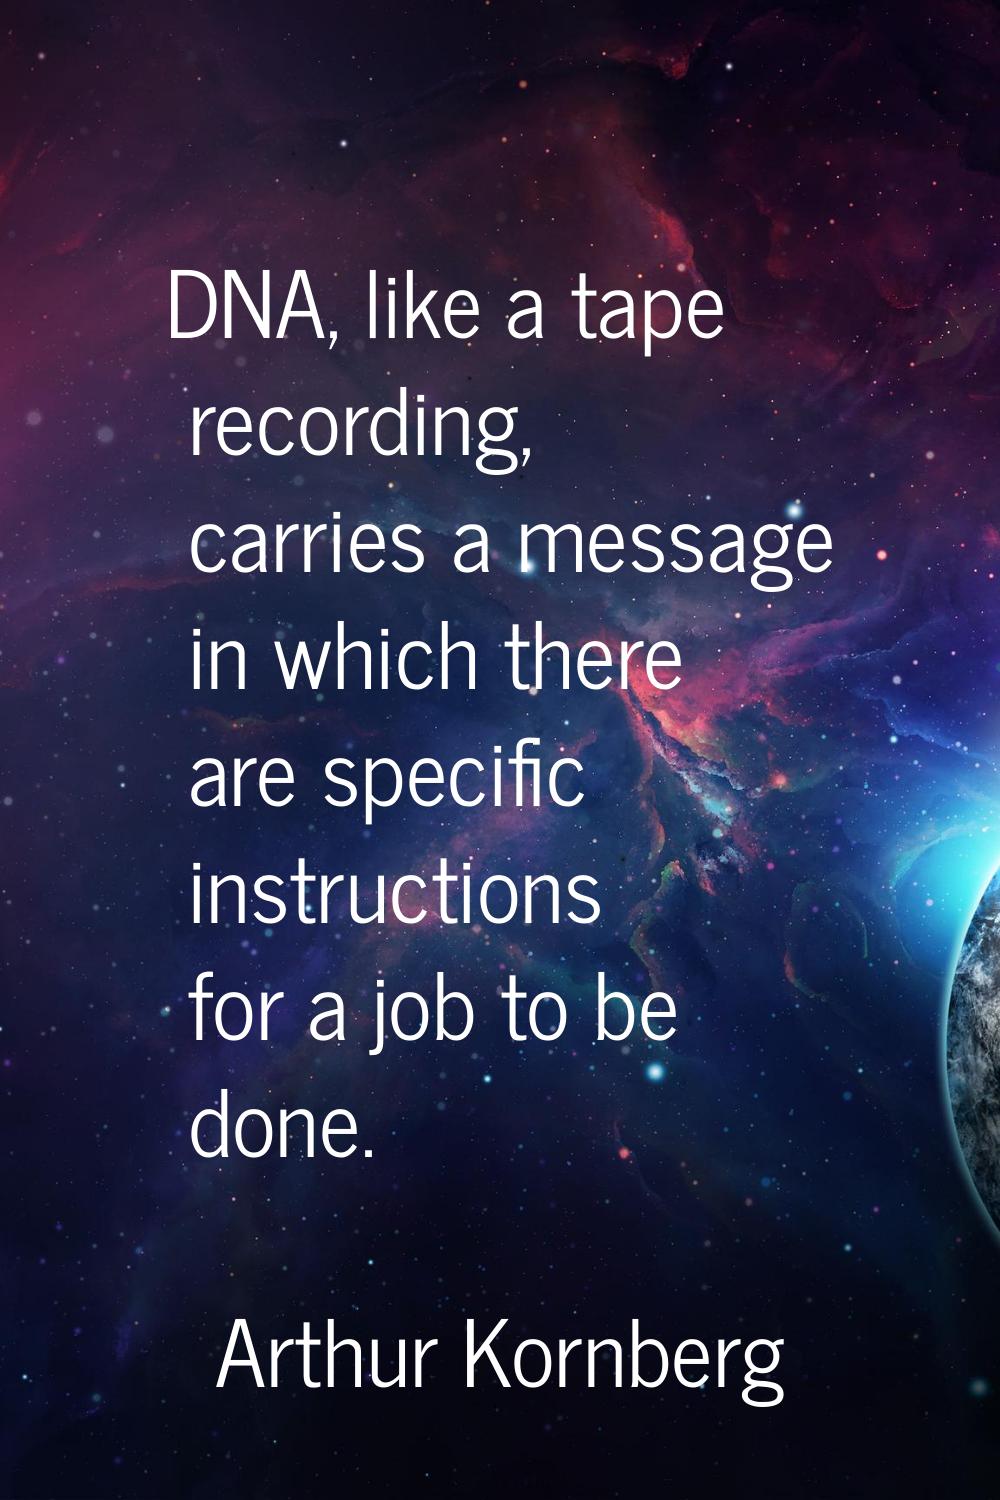 DNA, like a tape recording, carries a message in which there are specific instructions for a job to